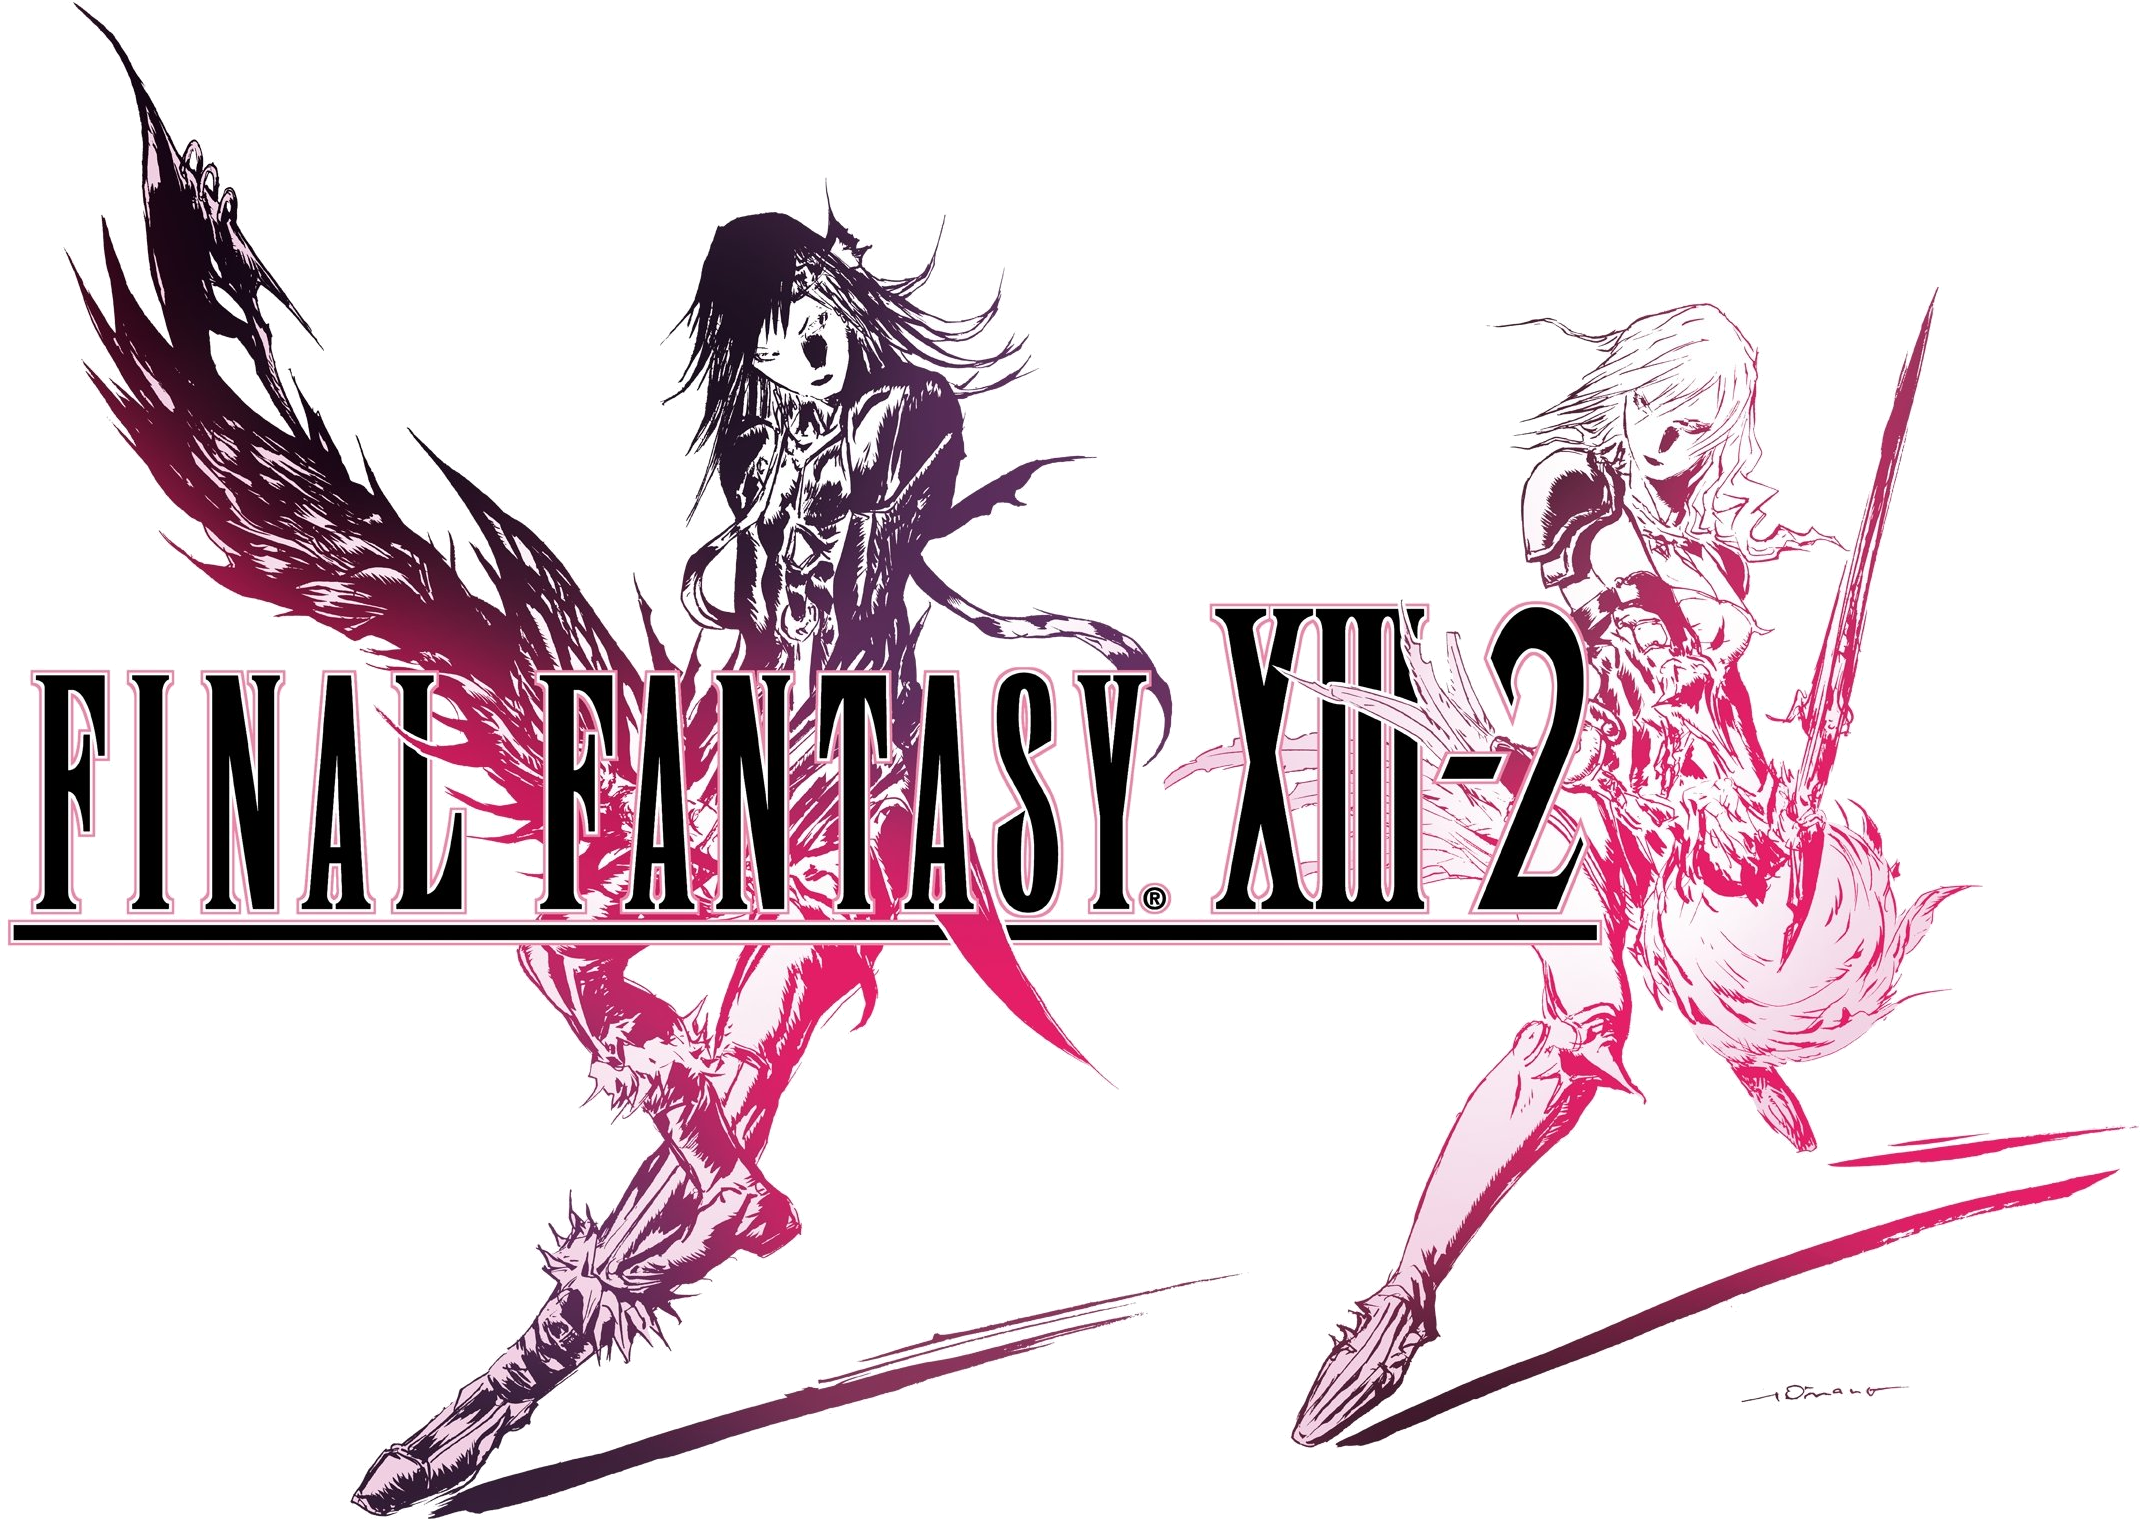 final fantasy xiii ost tension in the air extended